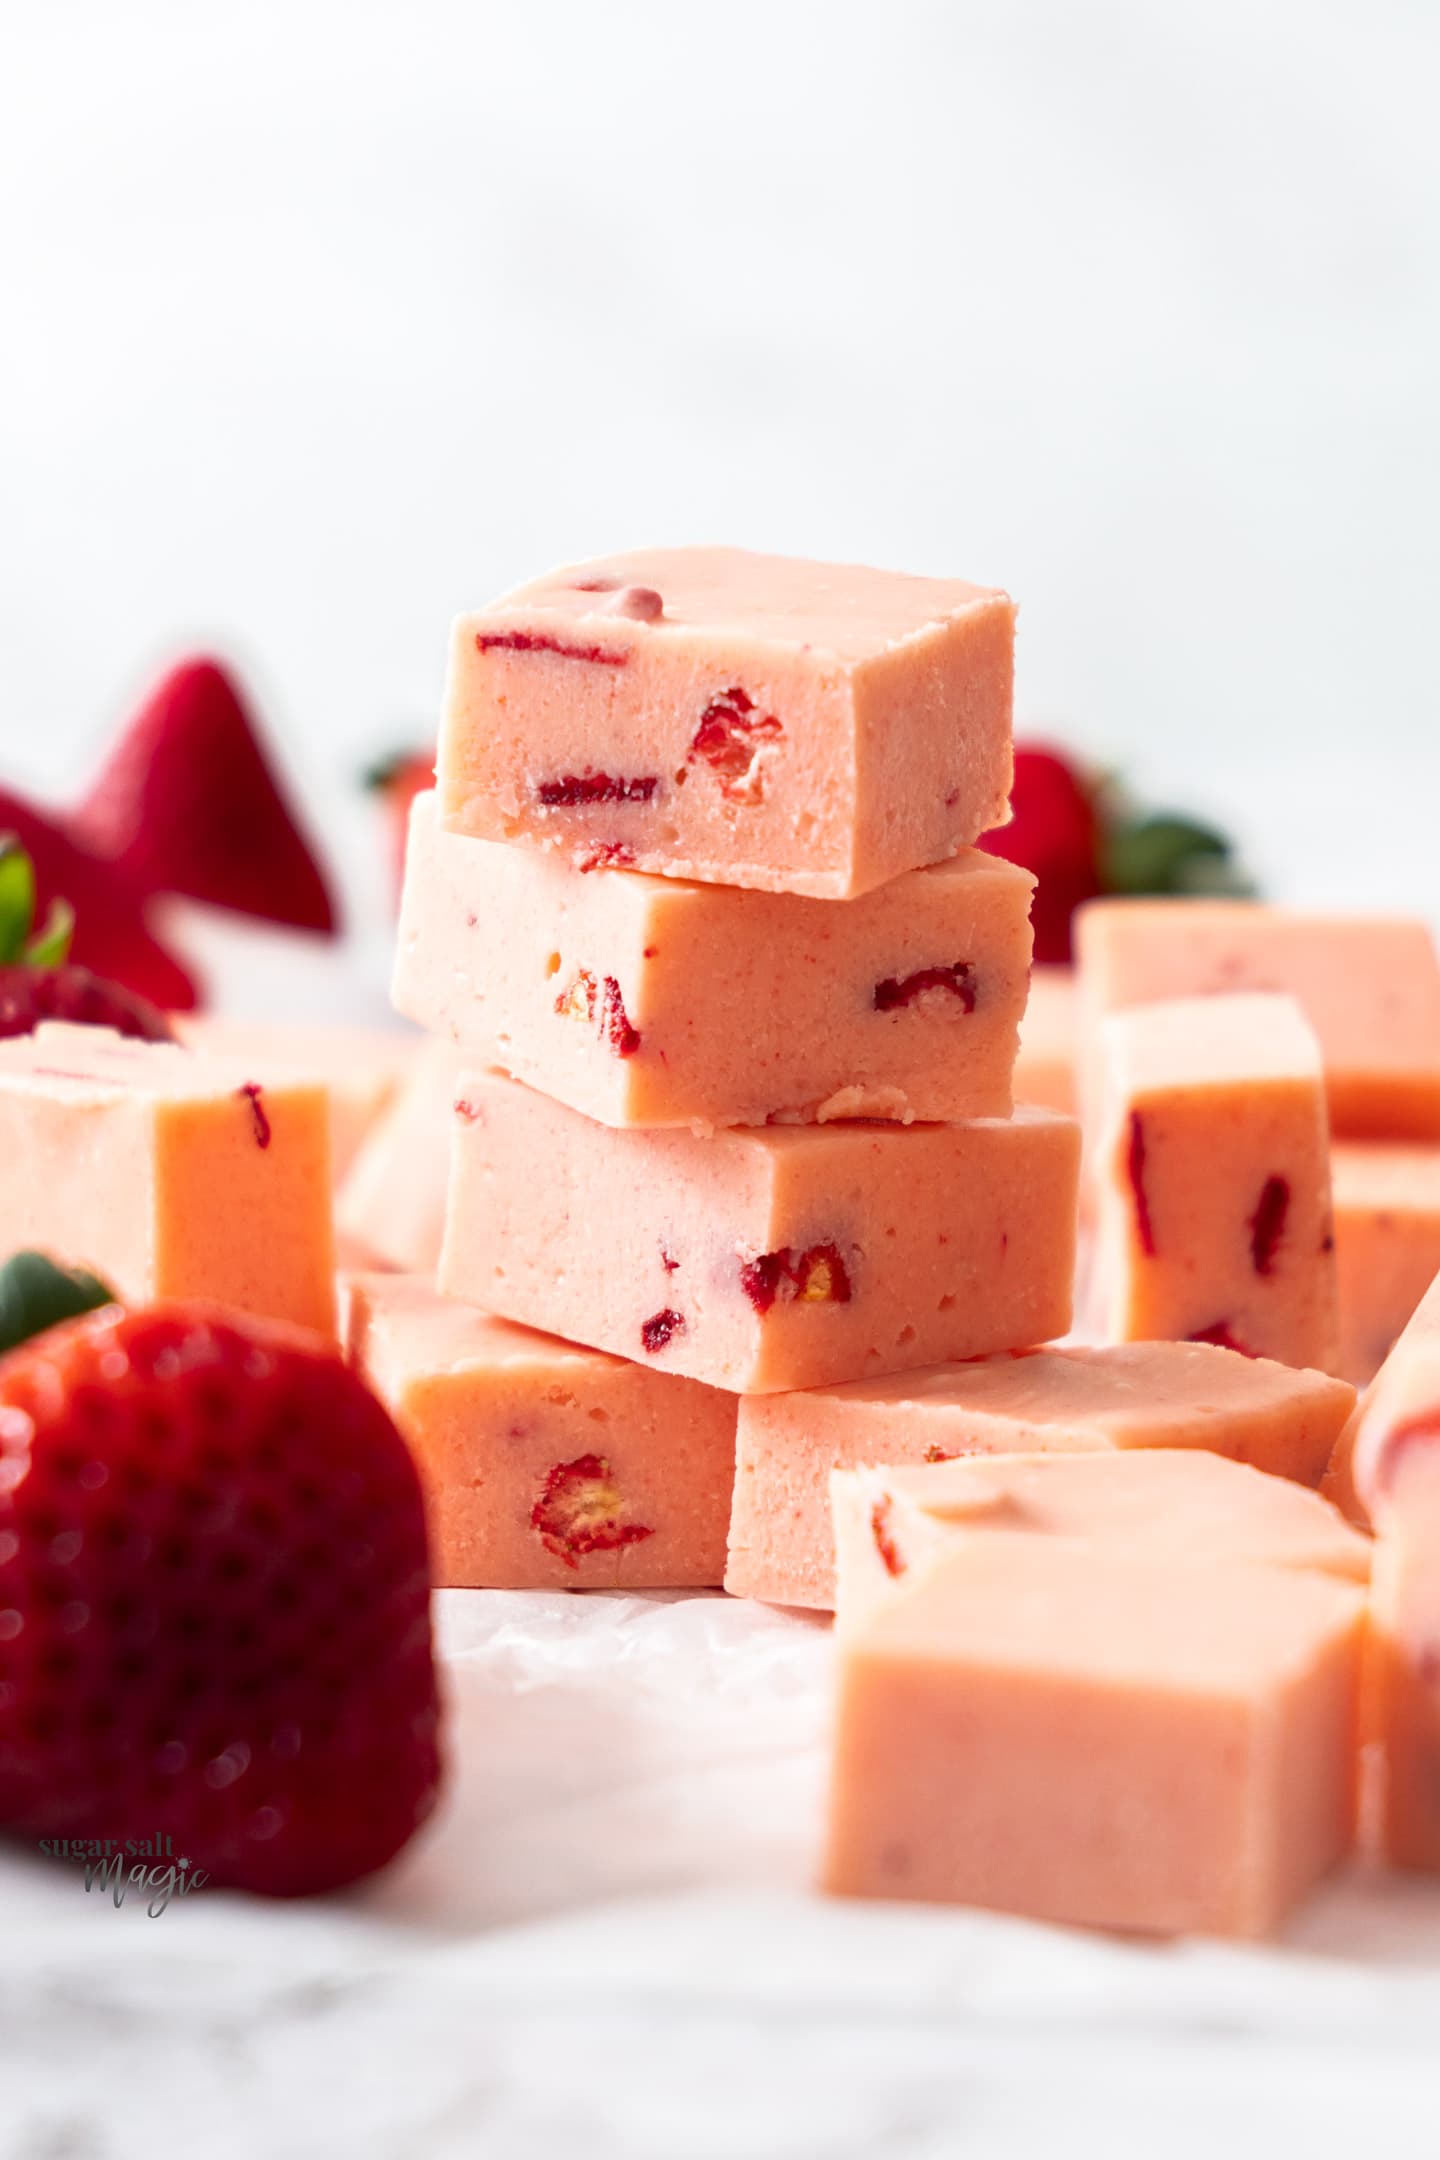 A stack of 4 pieces of strawberry fudge.